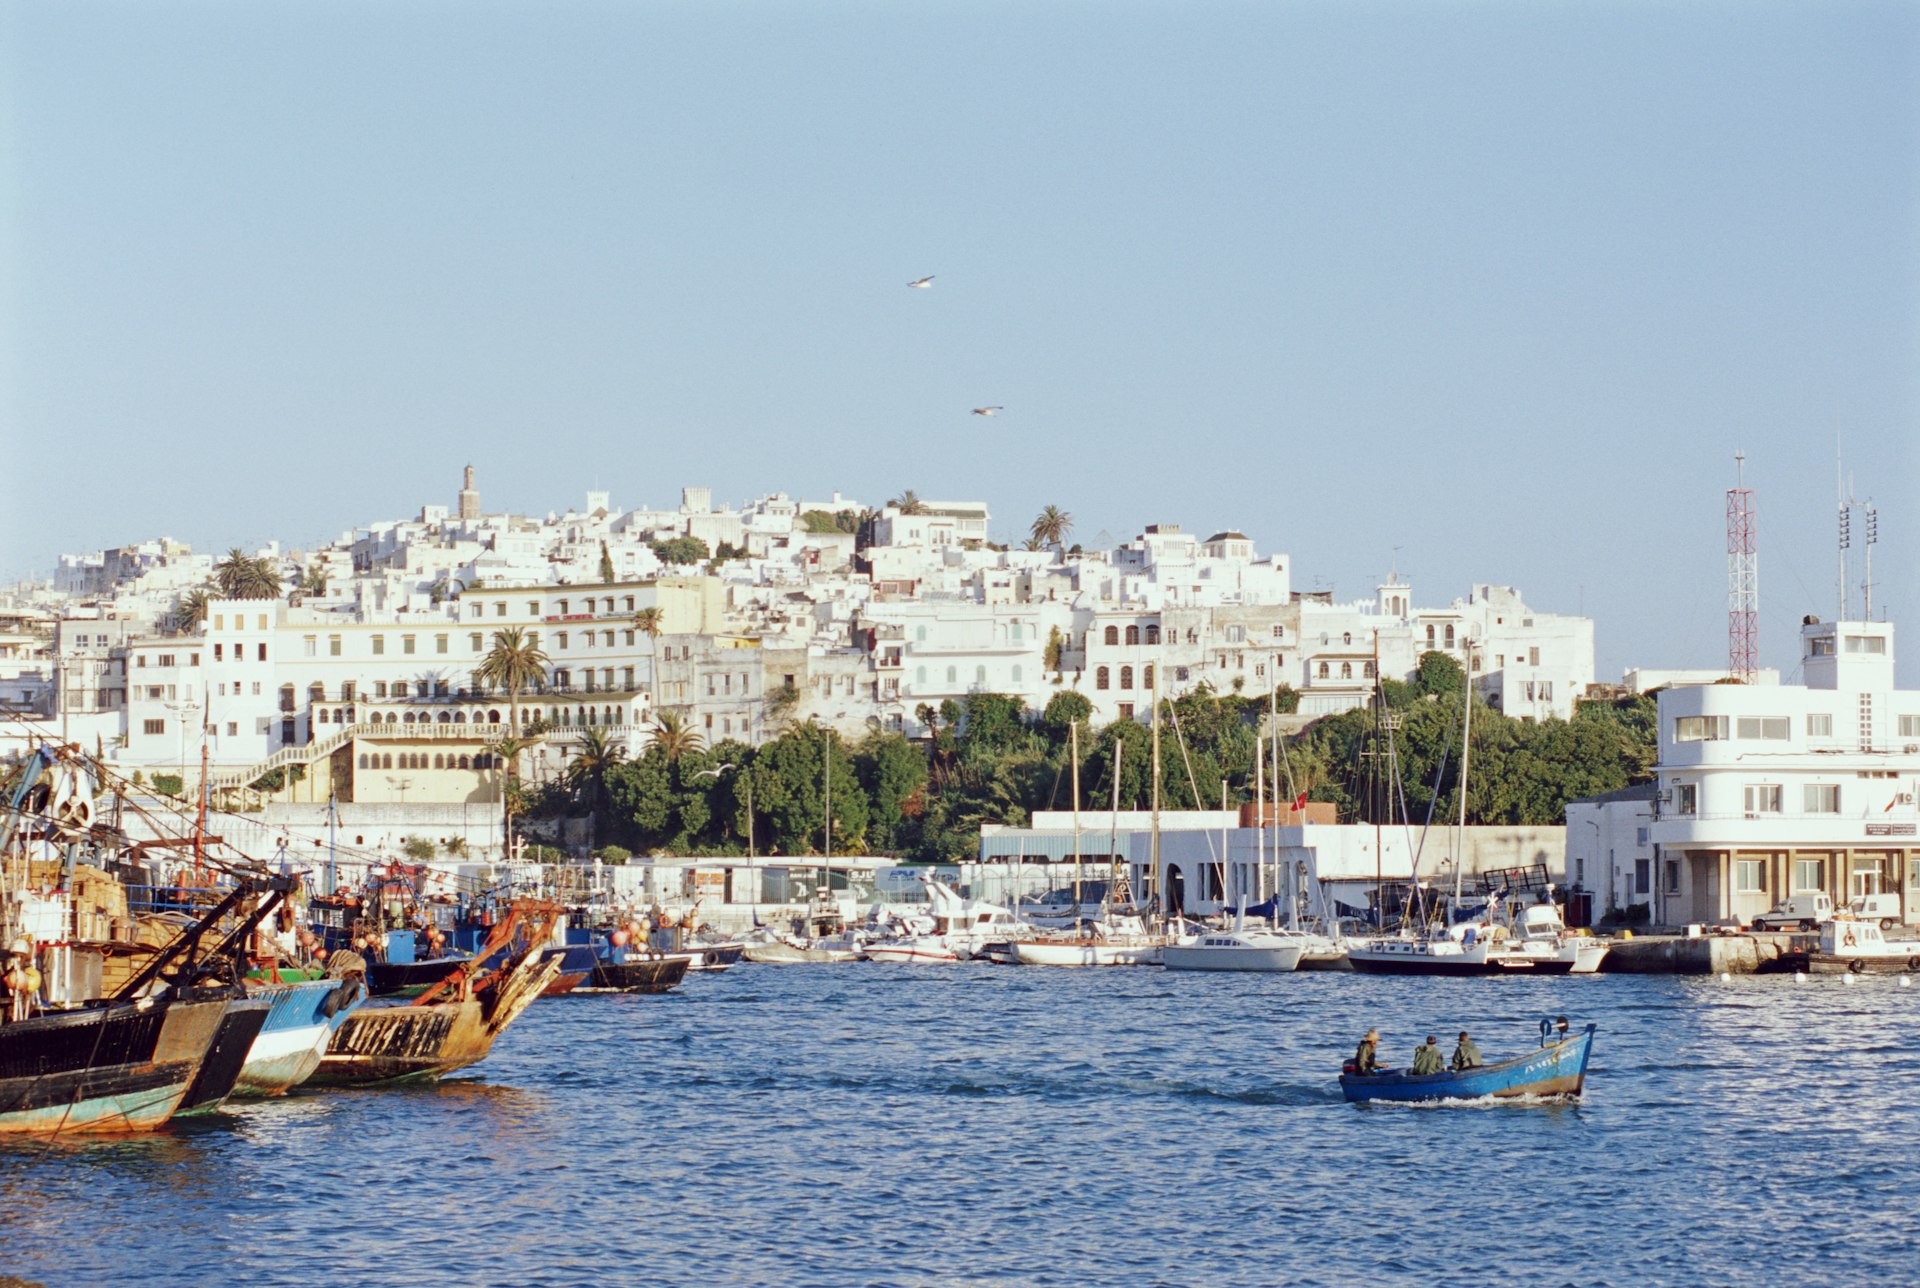 View of old city from the harbor of Tangier, Morocco